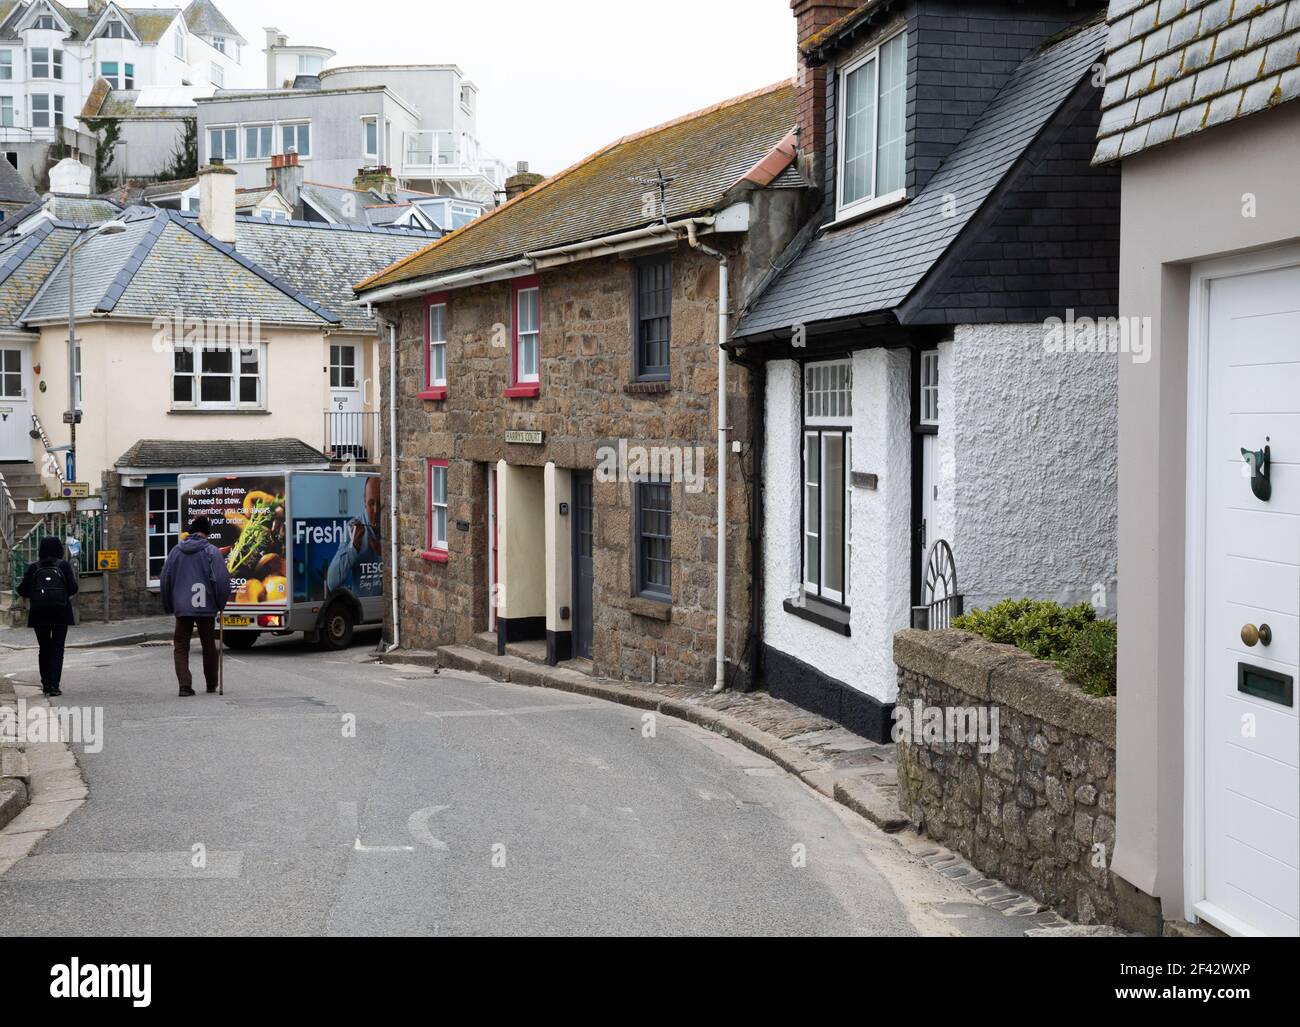 Tesco delivery van navigates the narrow lanes in St Ives, Cornwall, UK Stock Photo